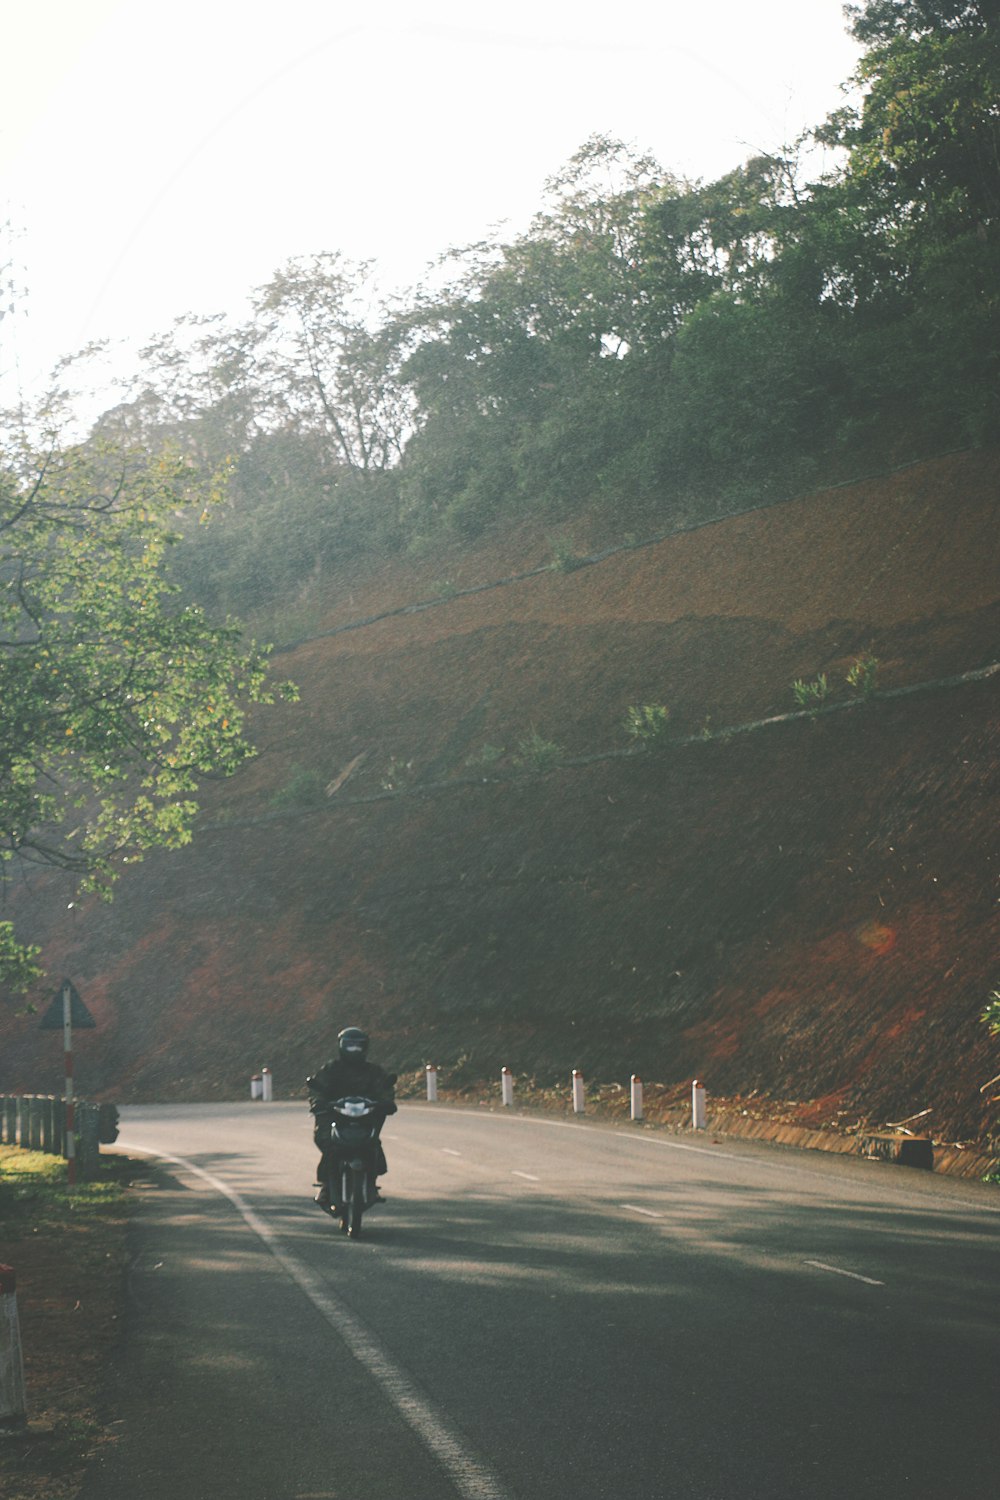 a man riding a motorcycle down a curvy road